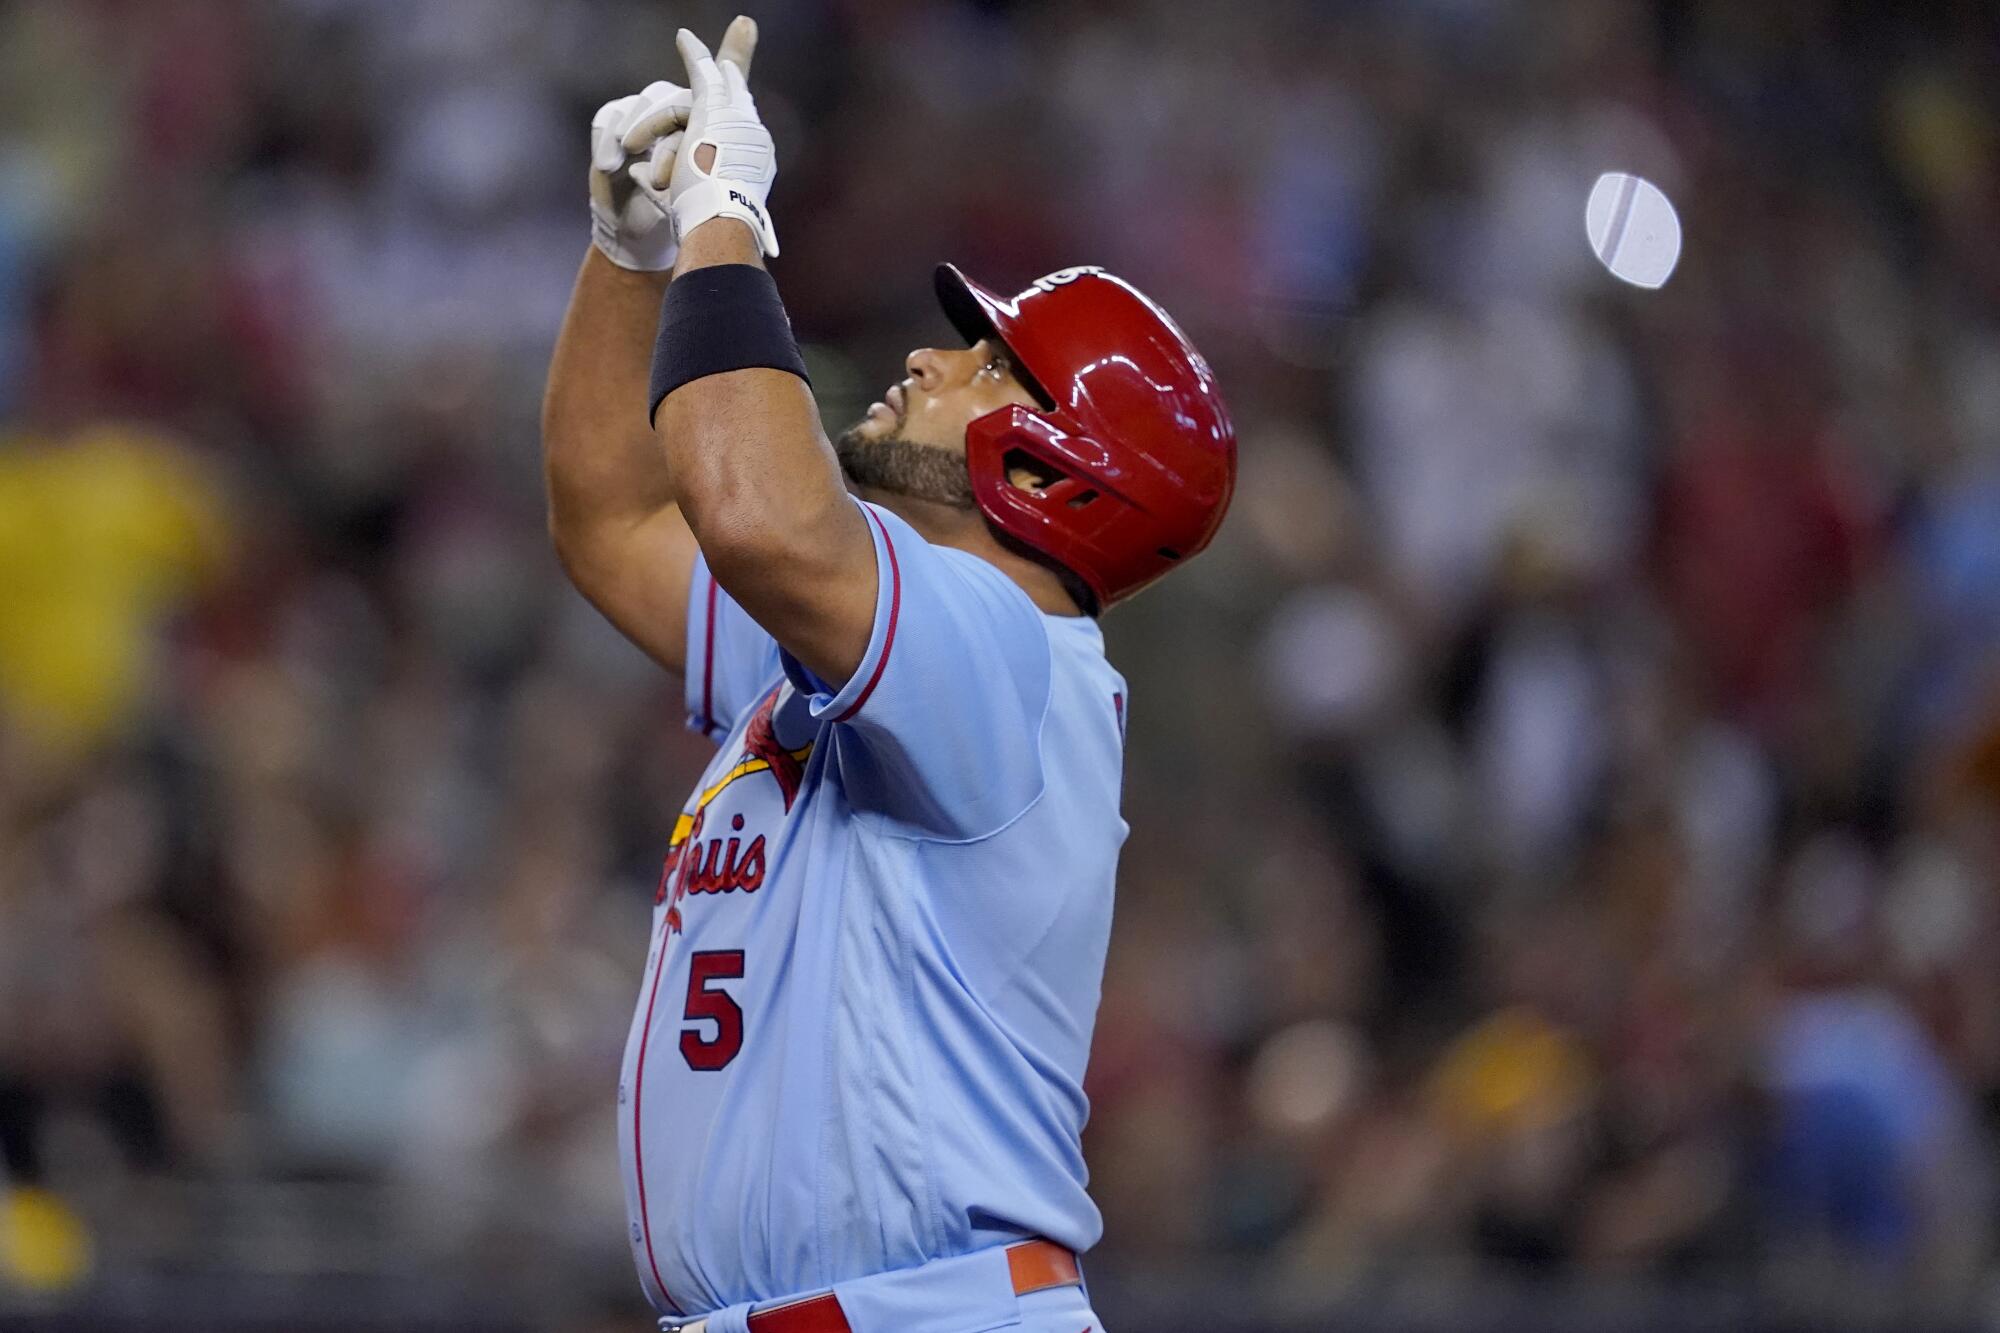 Rounding third, heading for home: Franchise great Pujols rejoins Cardinals  for one 'last run